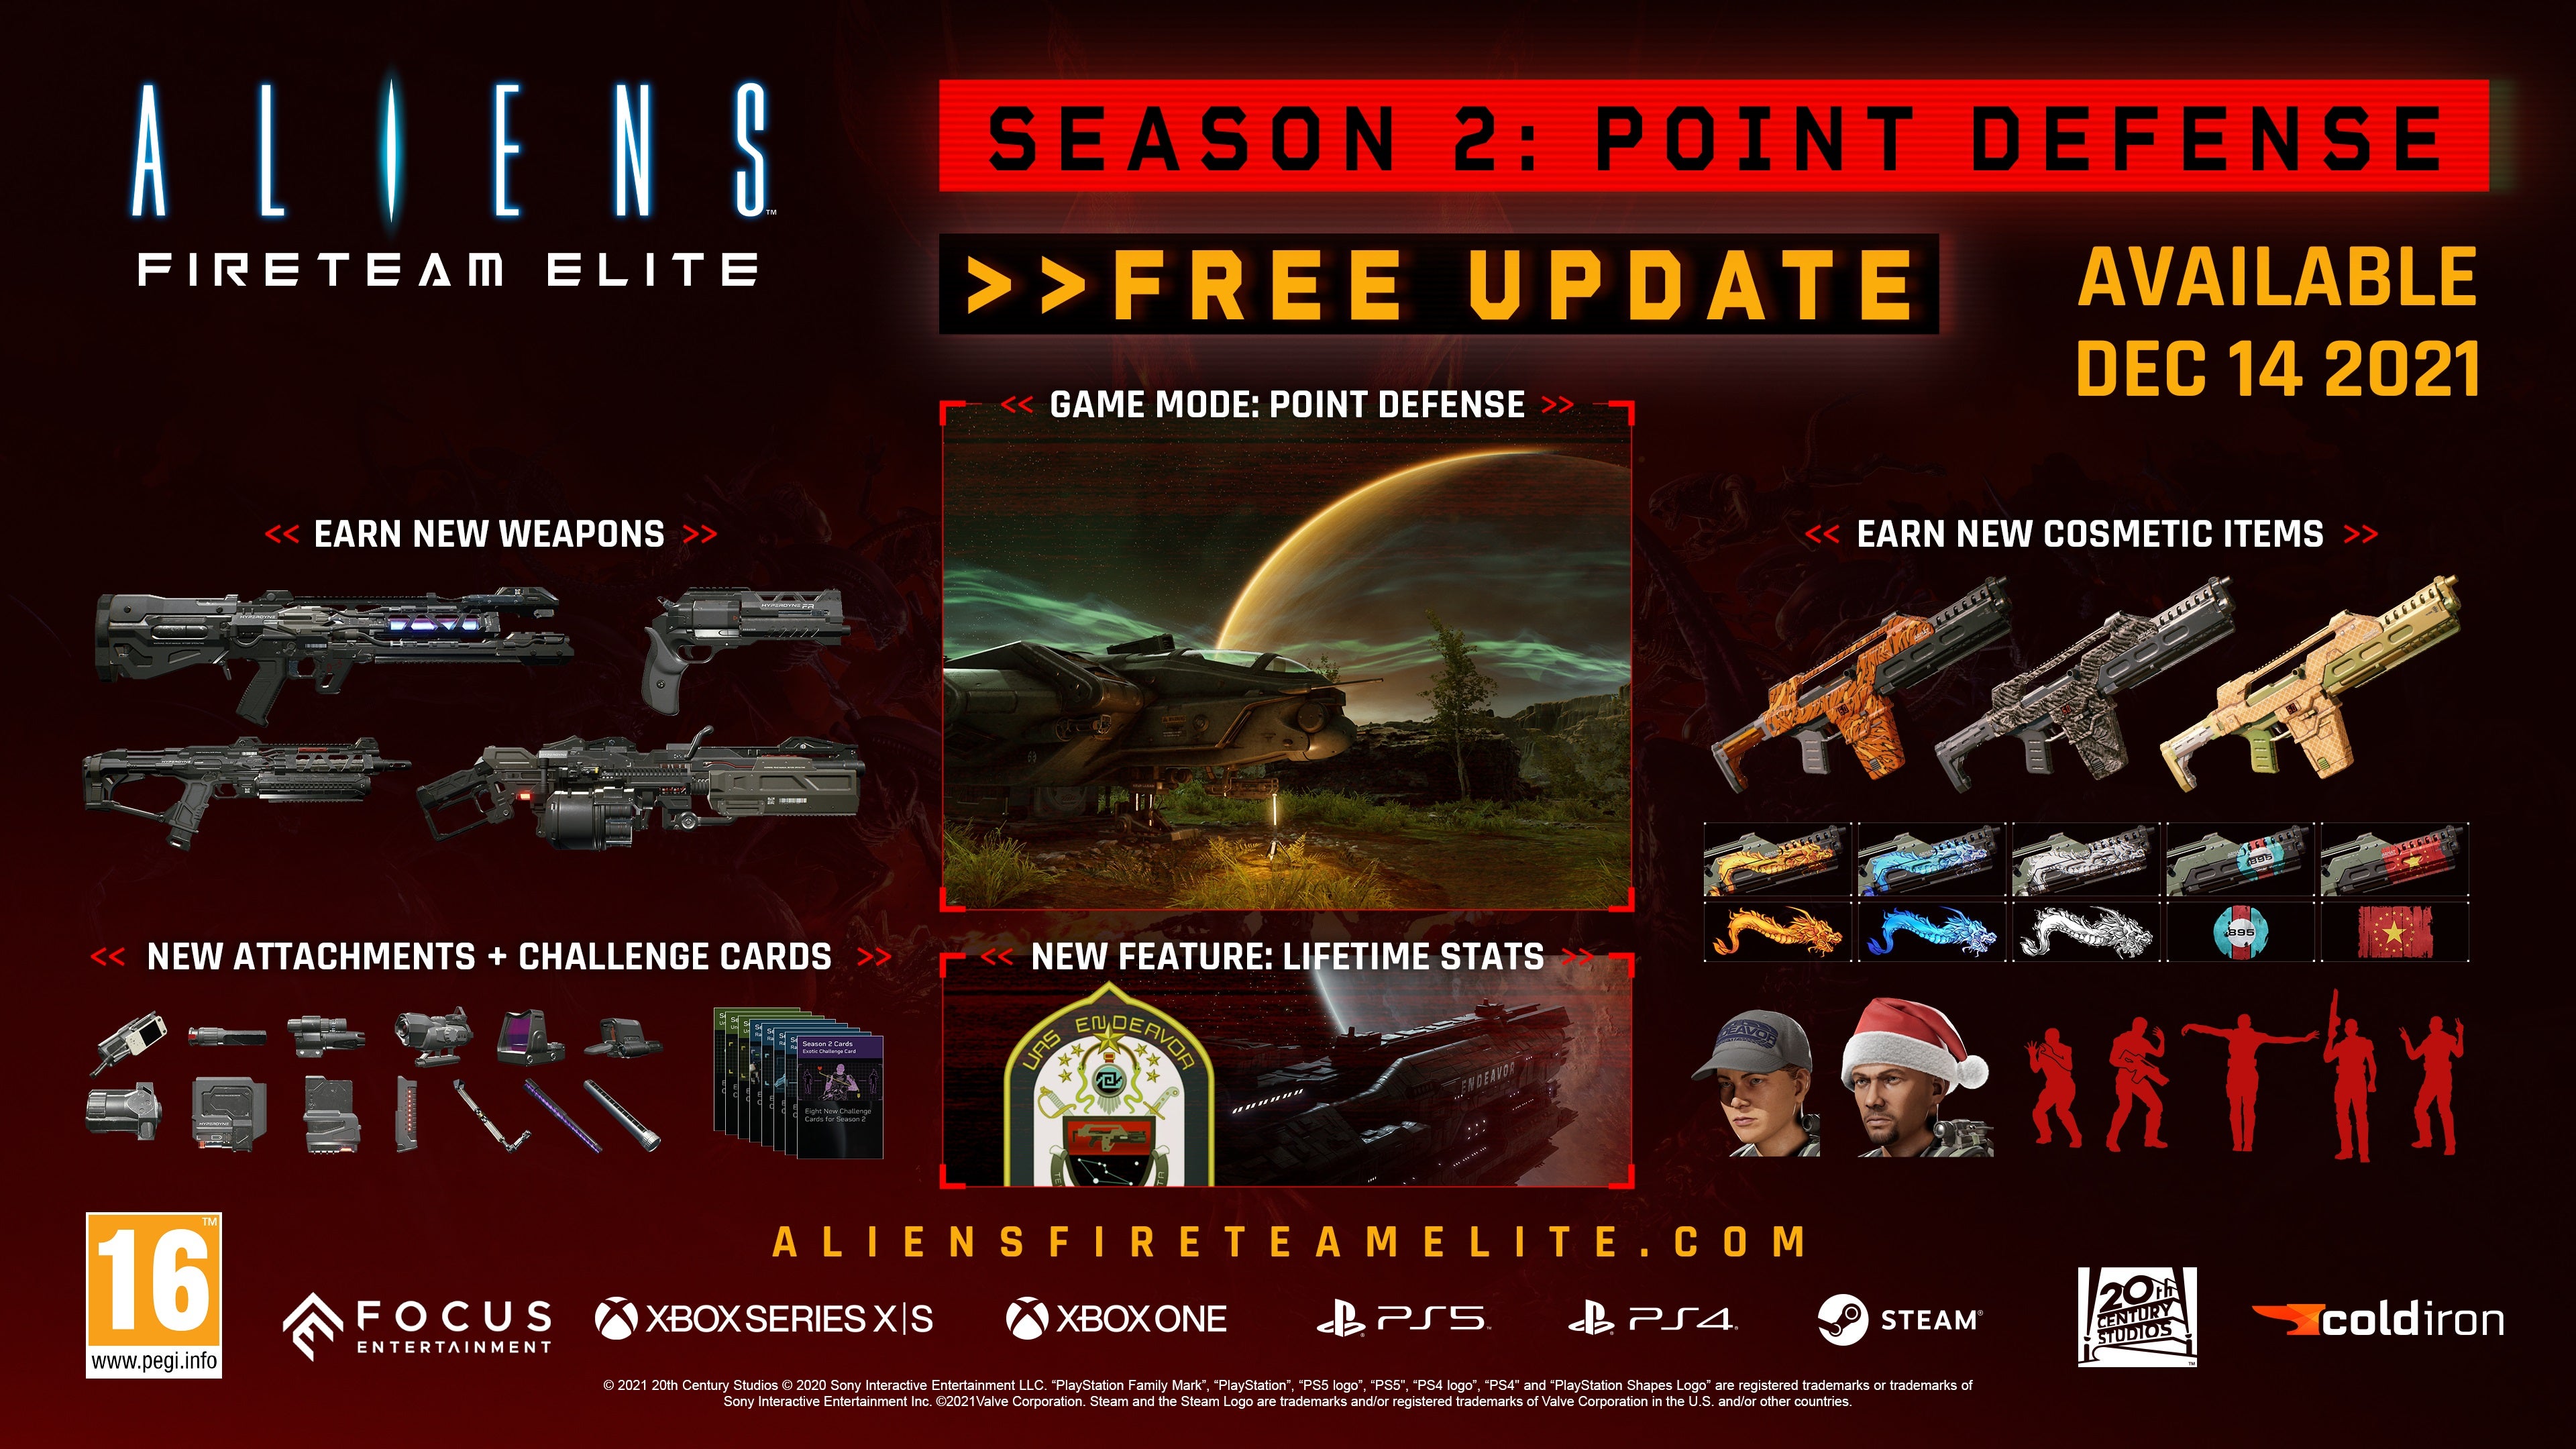 Details about Aliens: Fireteam Elite's new updatem there are pics of the new weapons, challenges and mode.